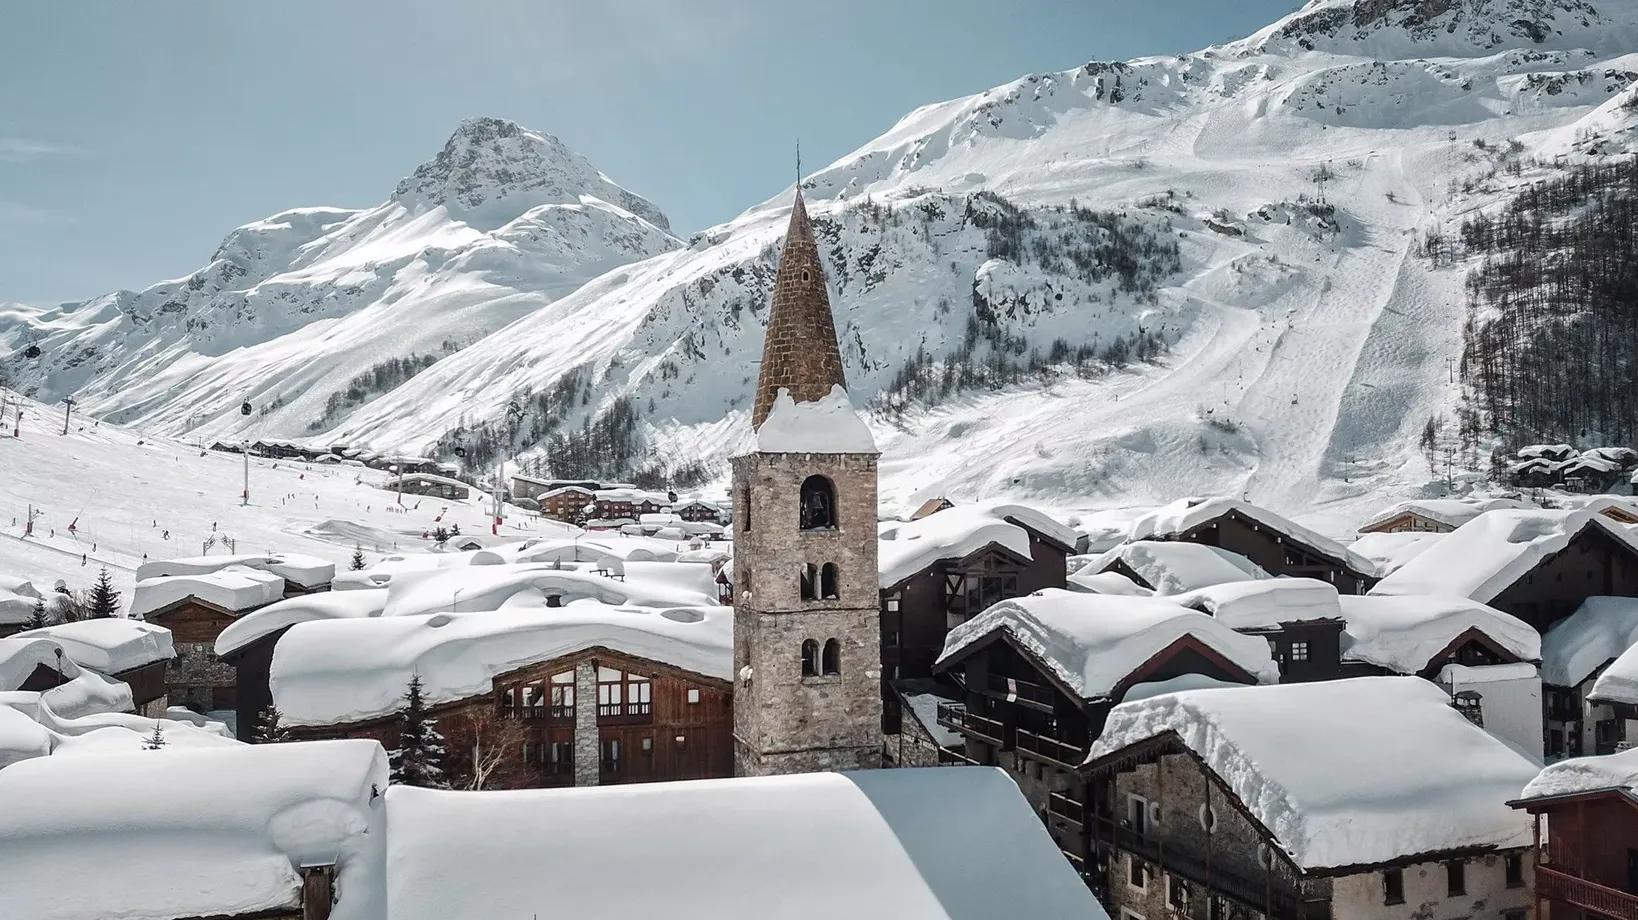 Val-d'Isere | Auvergne-Rhone-Alpes Region, France - Rated 6.1